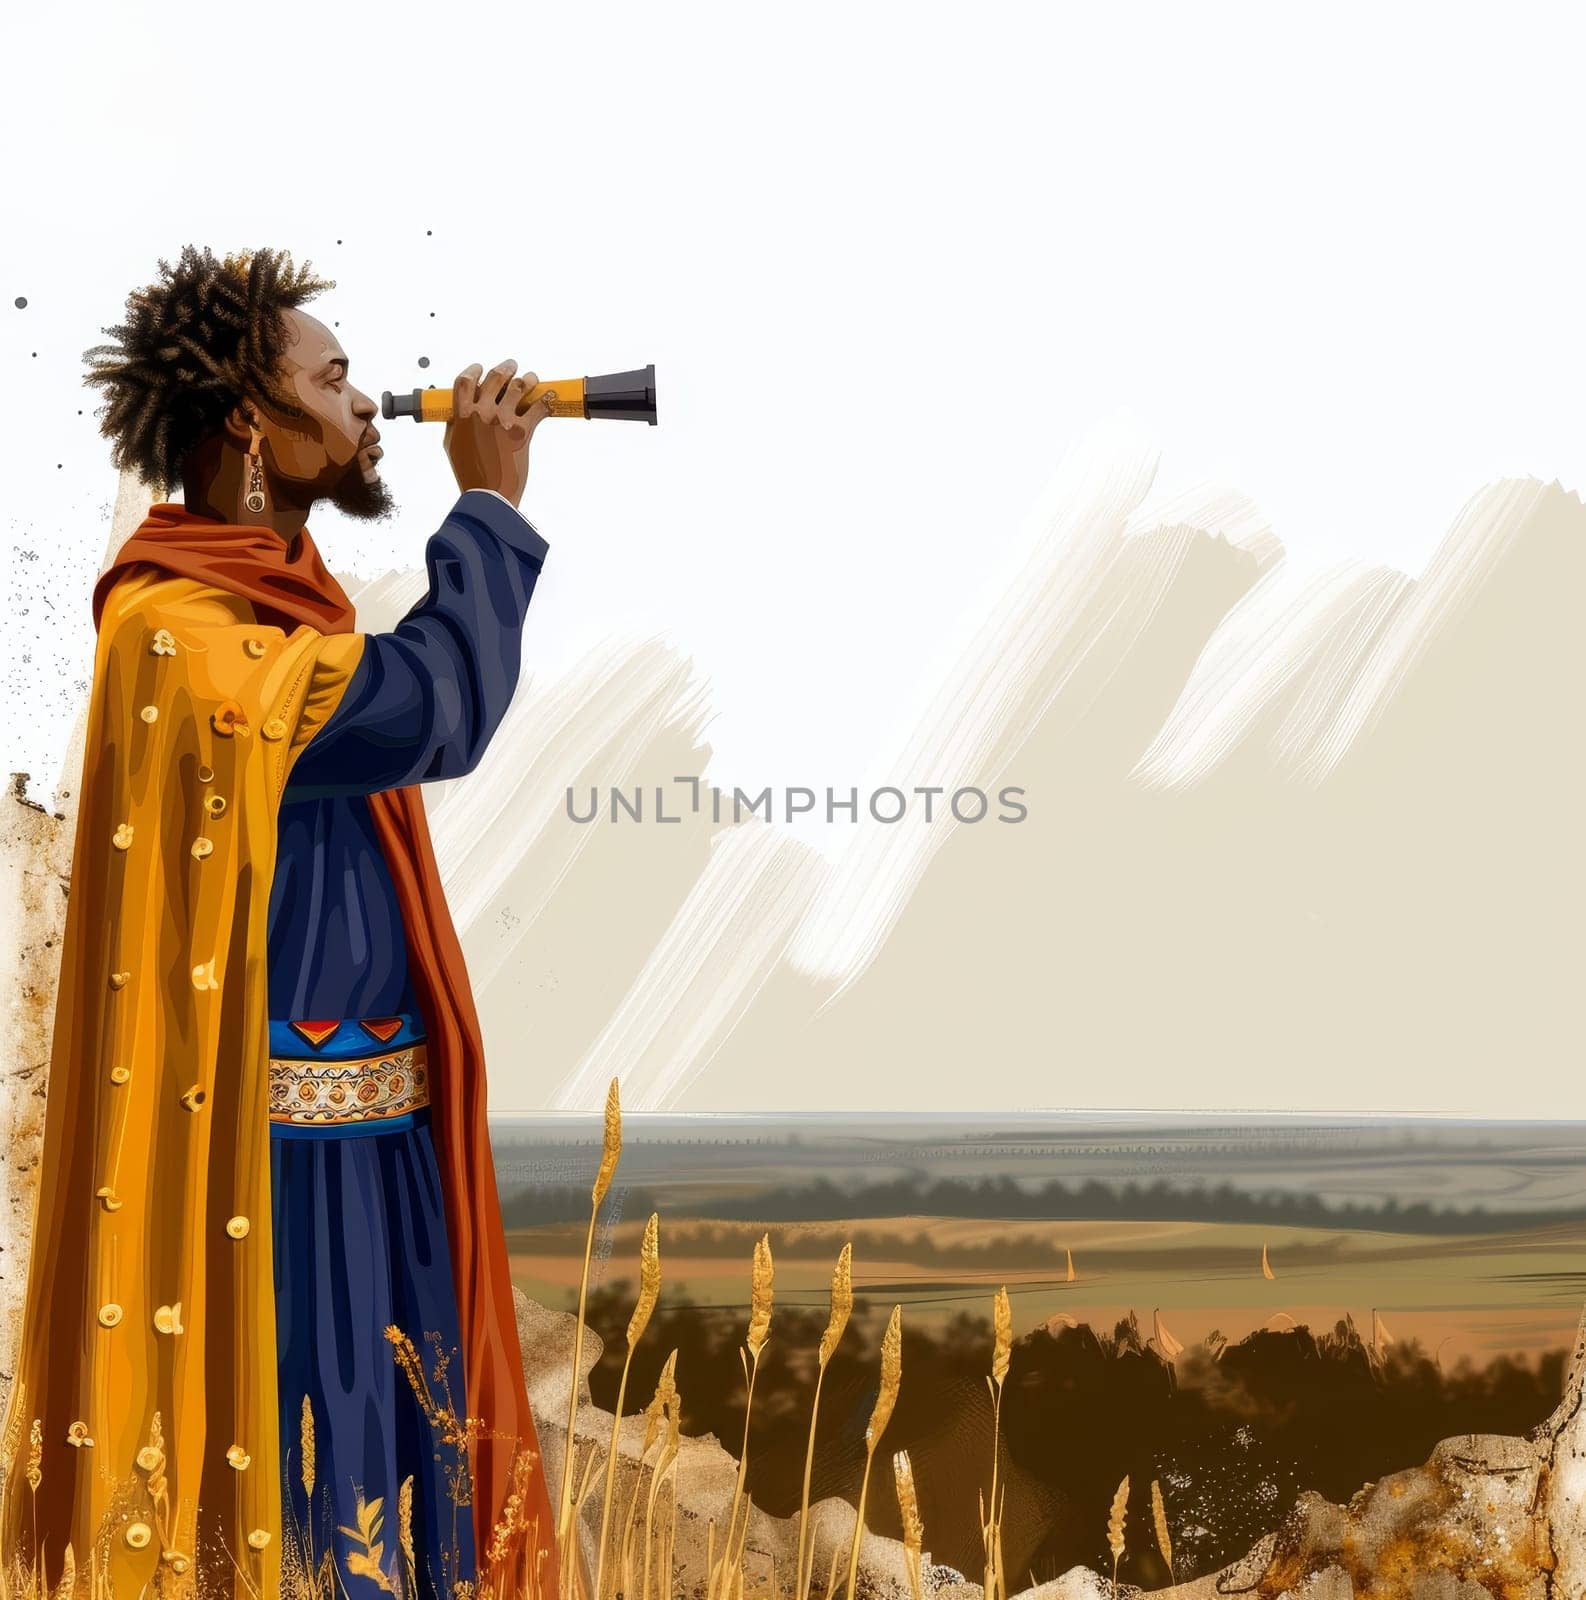 An illustration of a man in a traditional robe gazing through a telescope, surrounded by a backdrop of golden fields, symbolizing exploration and discovery.. by sfinks